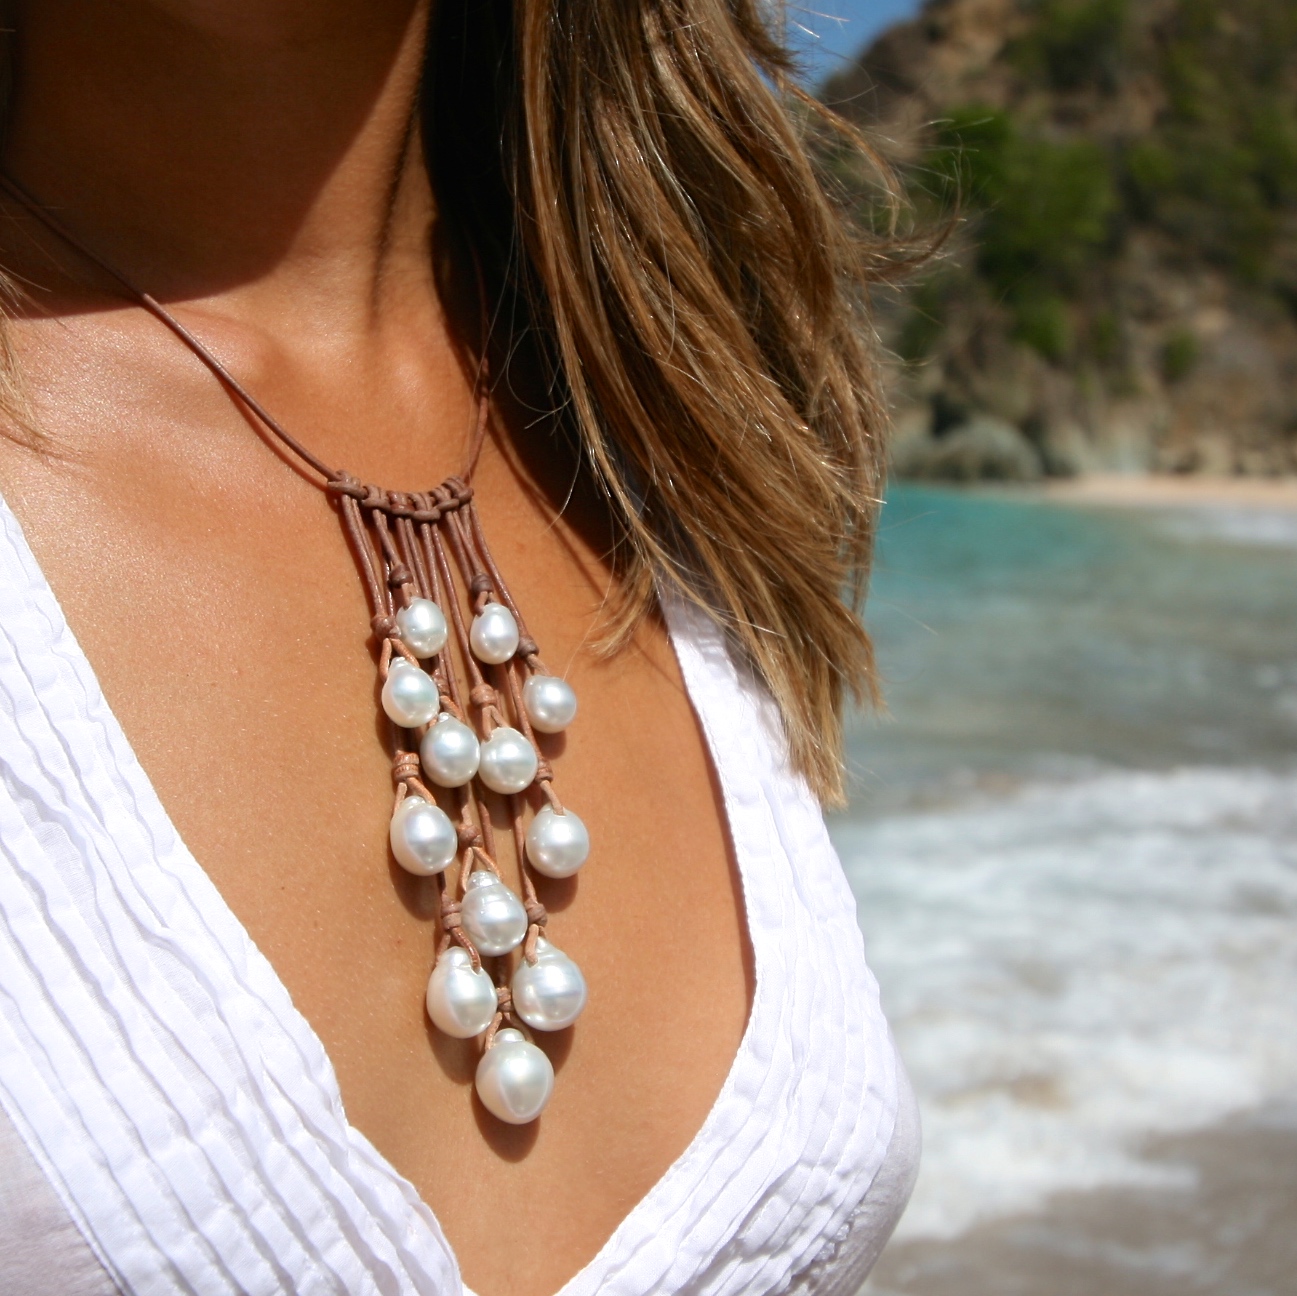 St Barth jewelry white pearls necklace